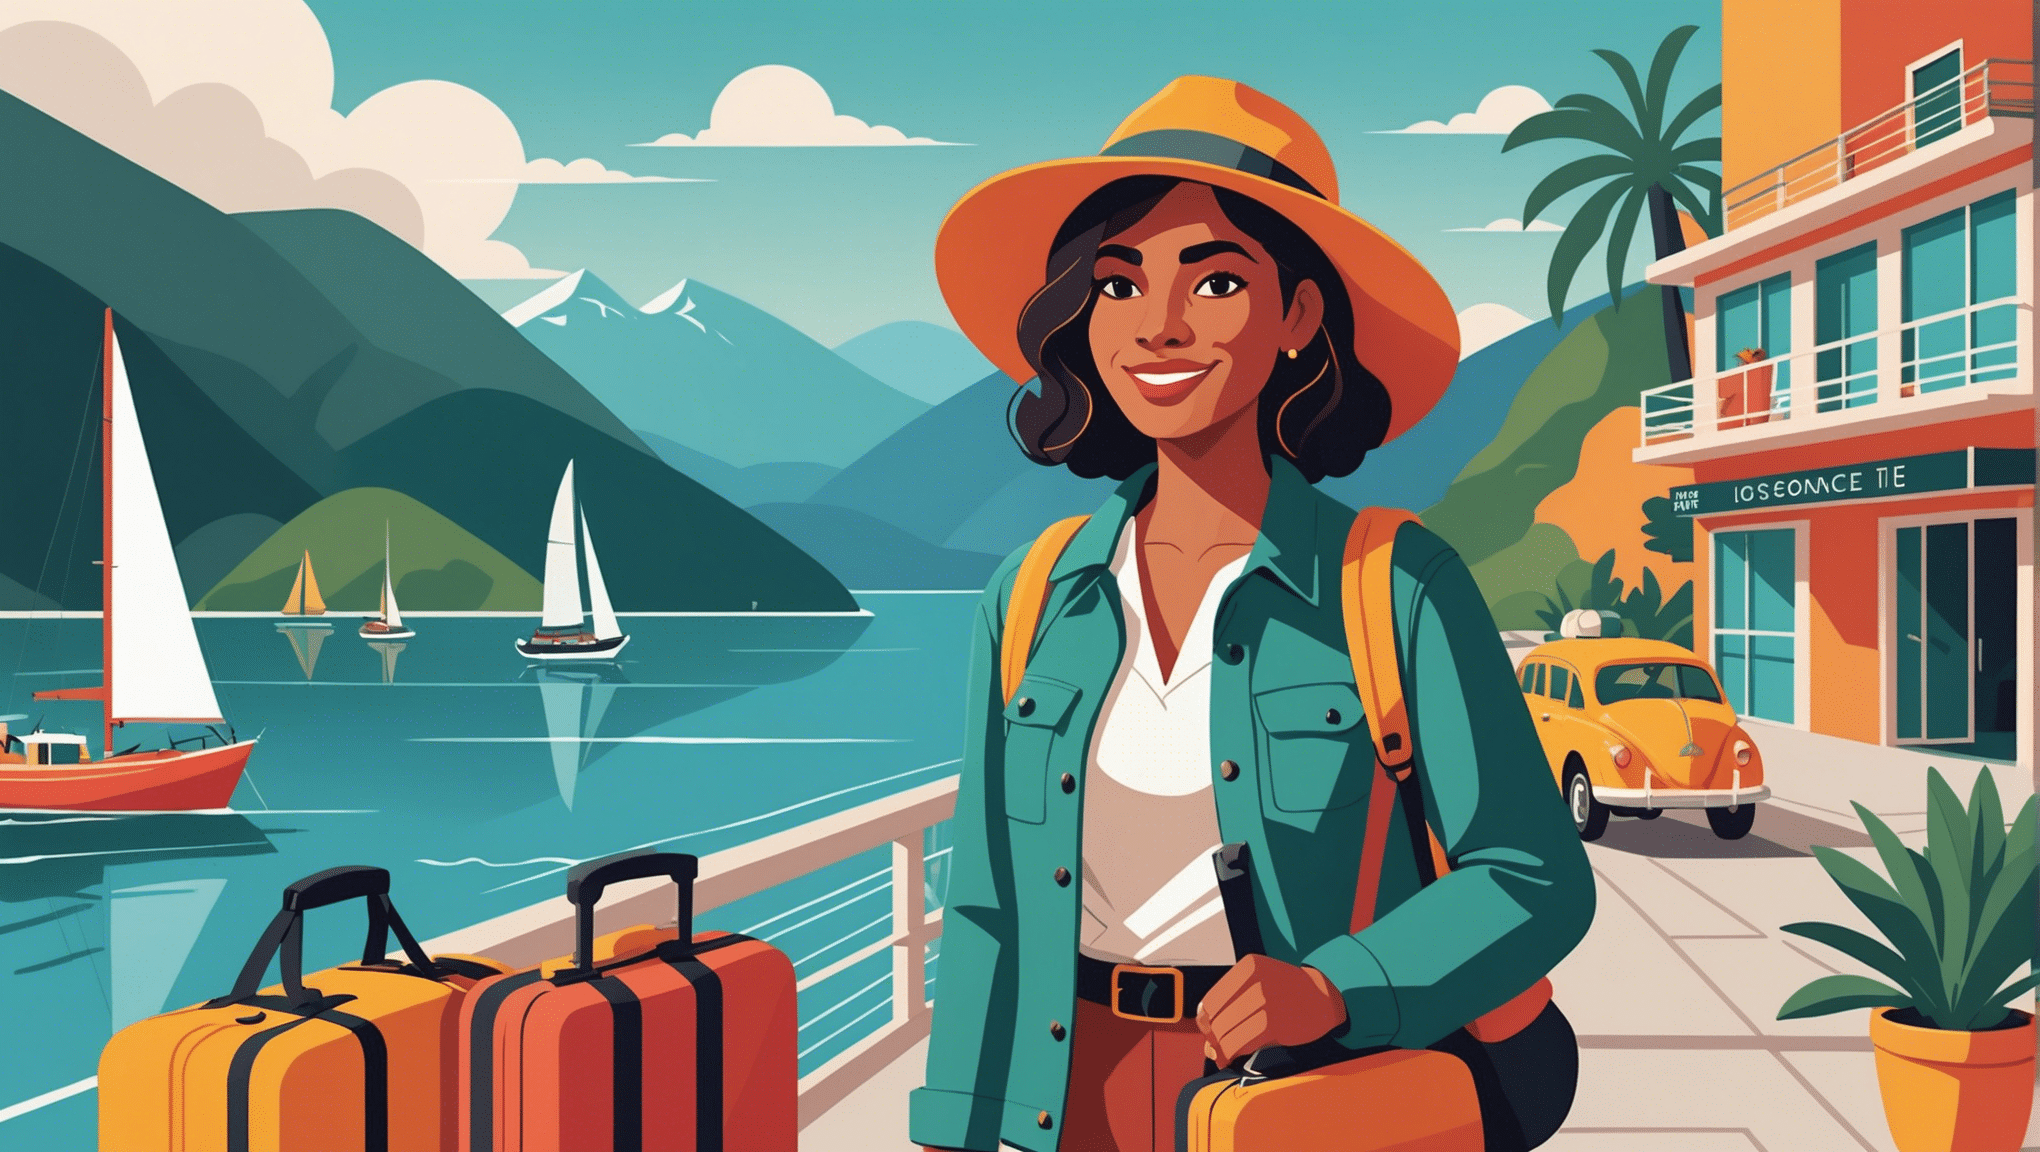 learn essential safety tips for traveling solo as a woman and enjoy your travel experience to the fullest.